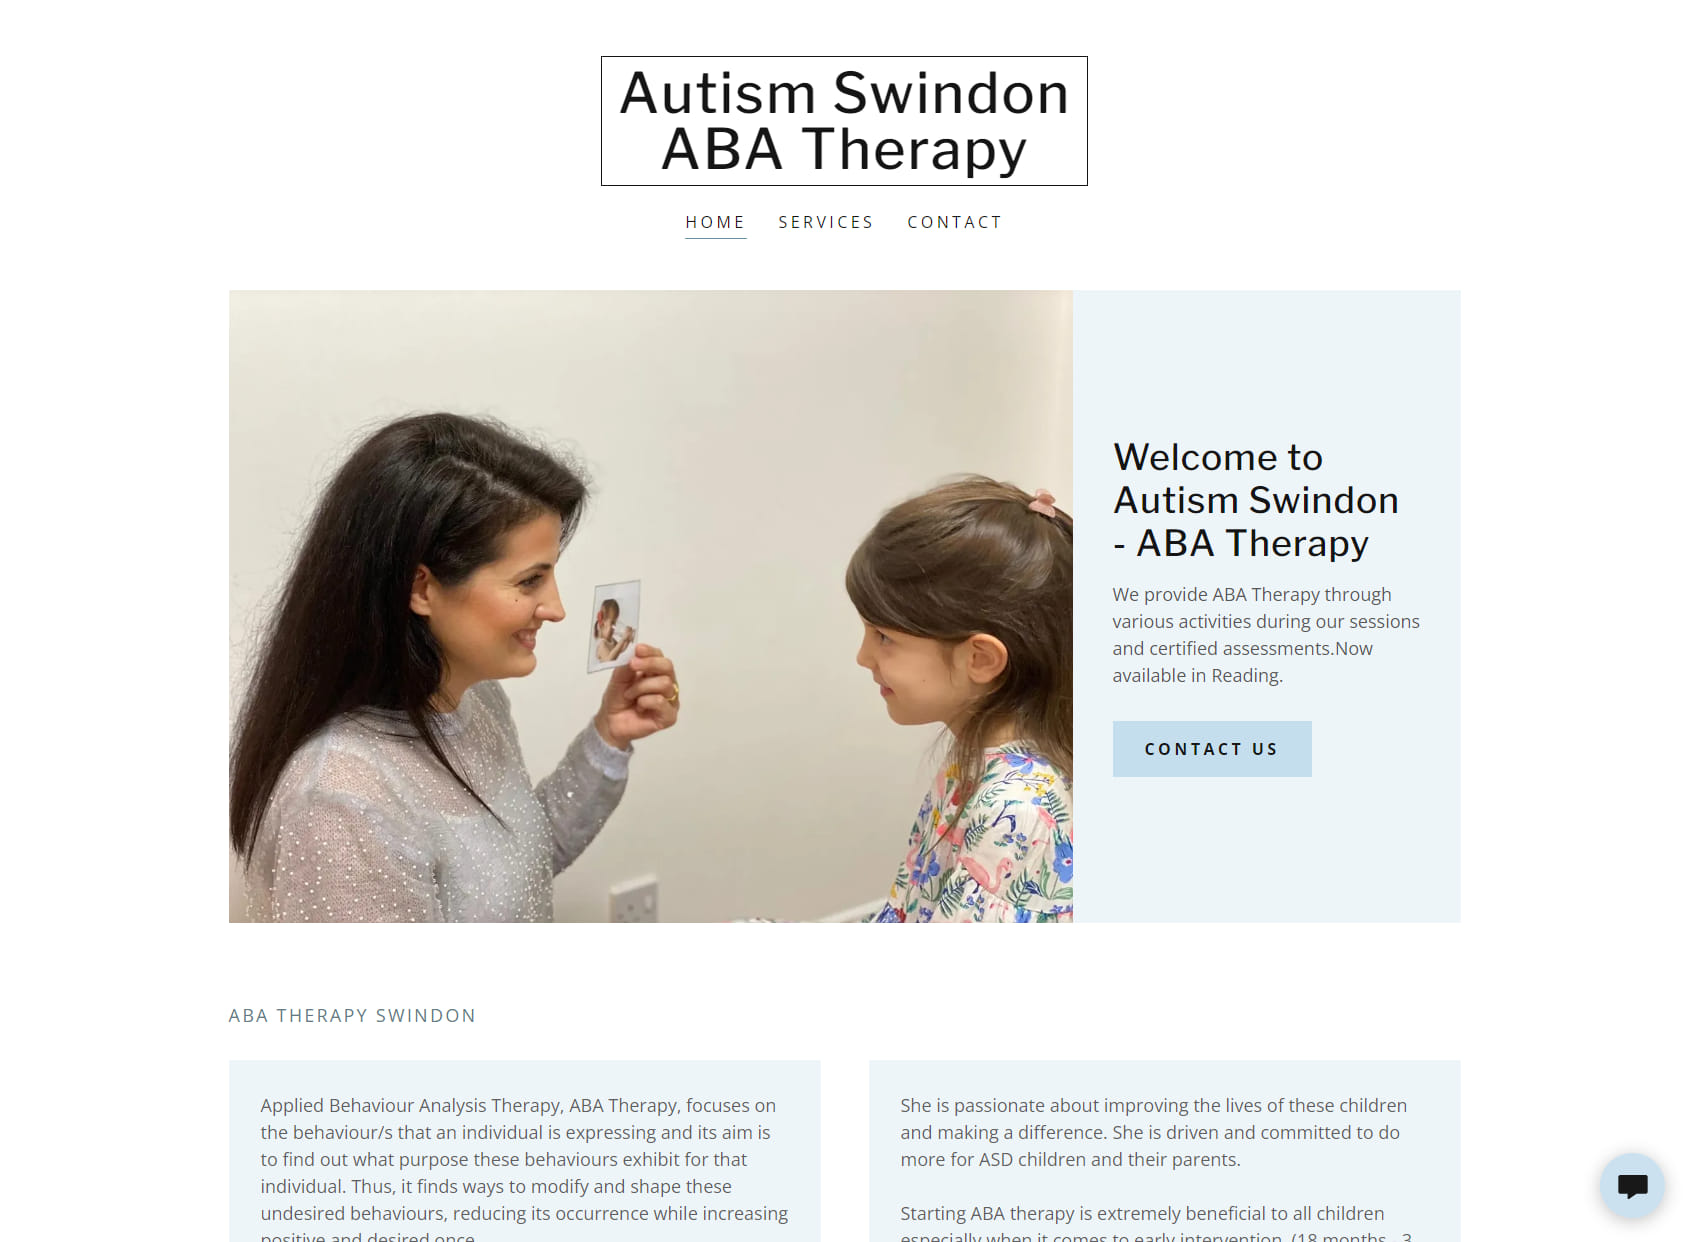 Austism Swindon ABA Therapy